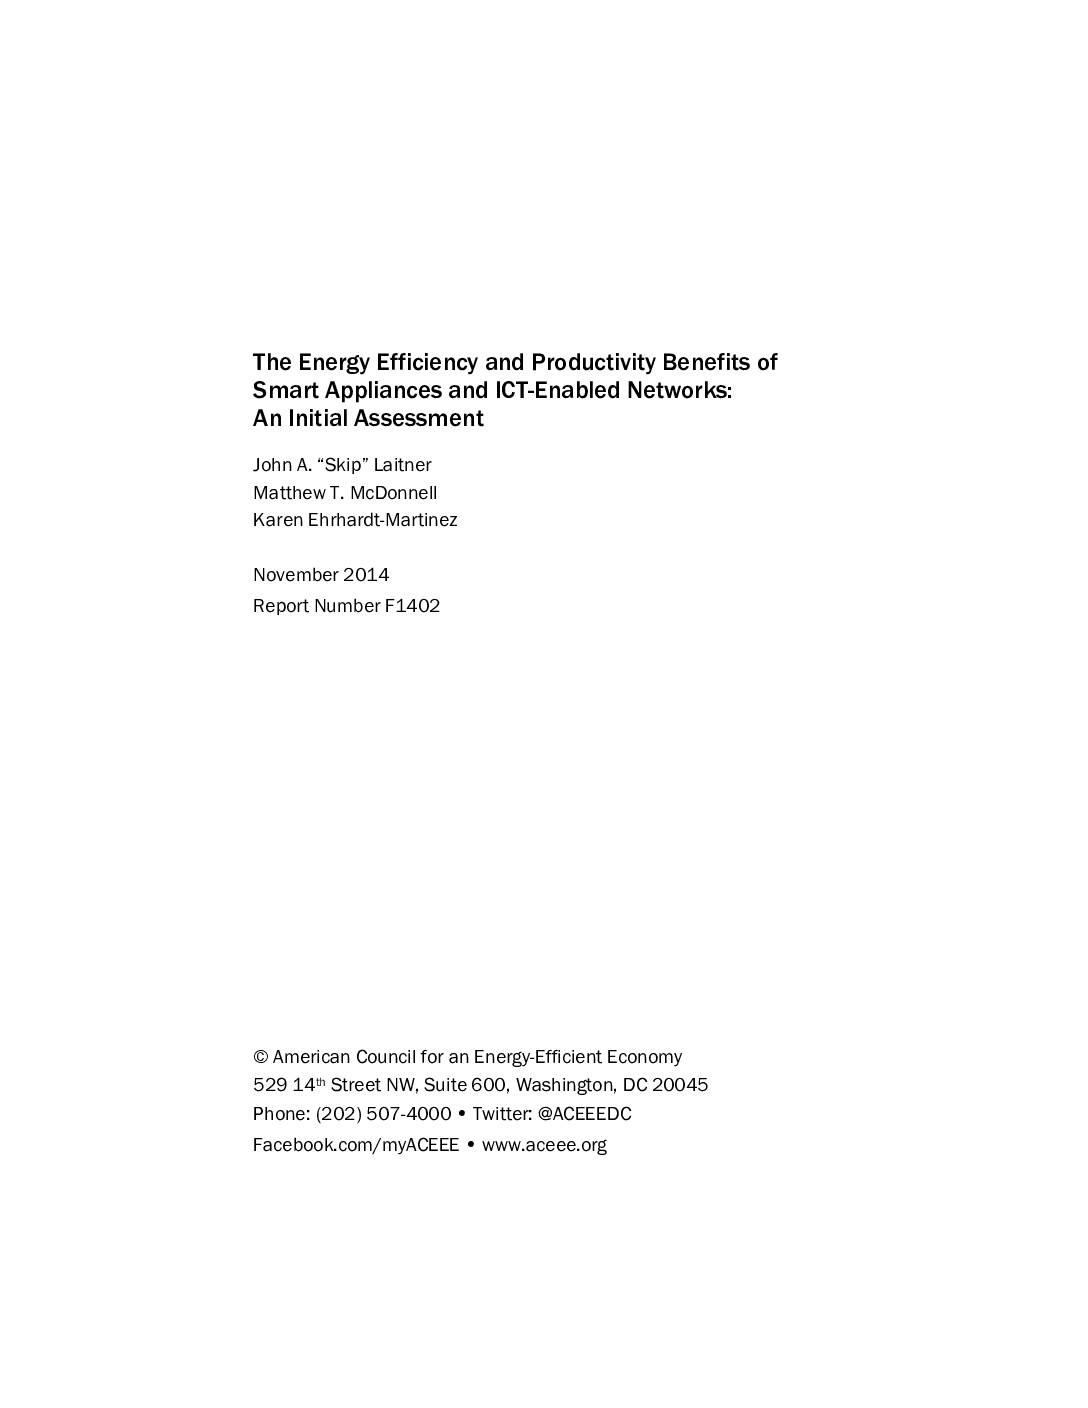 The Energy Efficiency and Productivity Benefits of Smart Appliances and ICT-Enabled Networks: An Initial Assessment